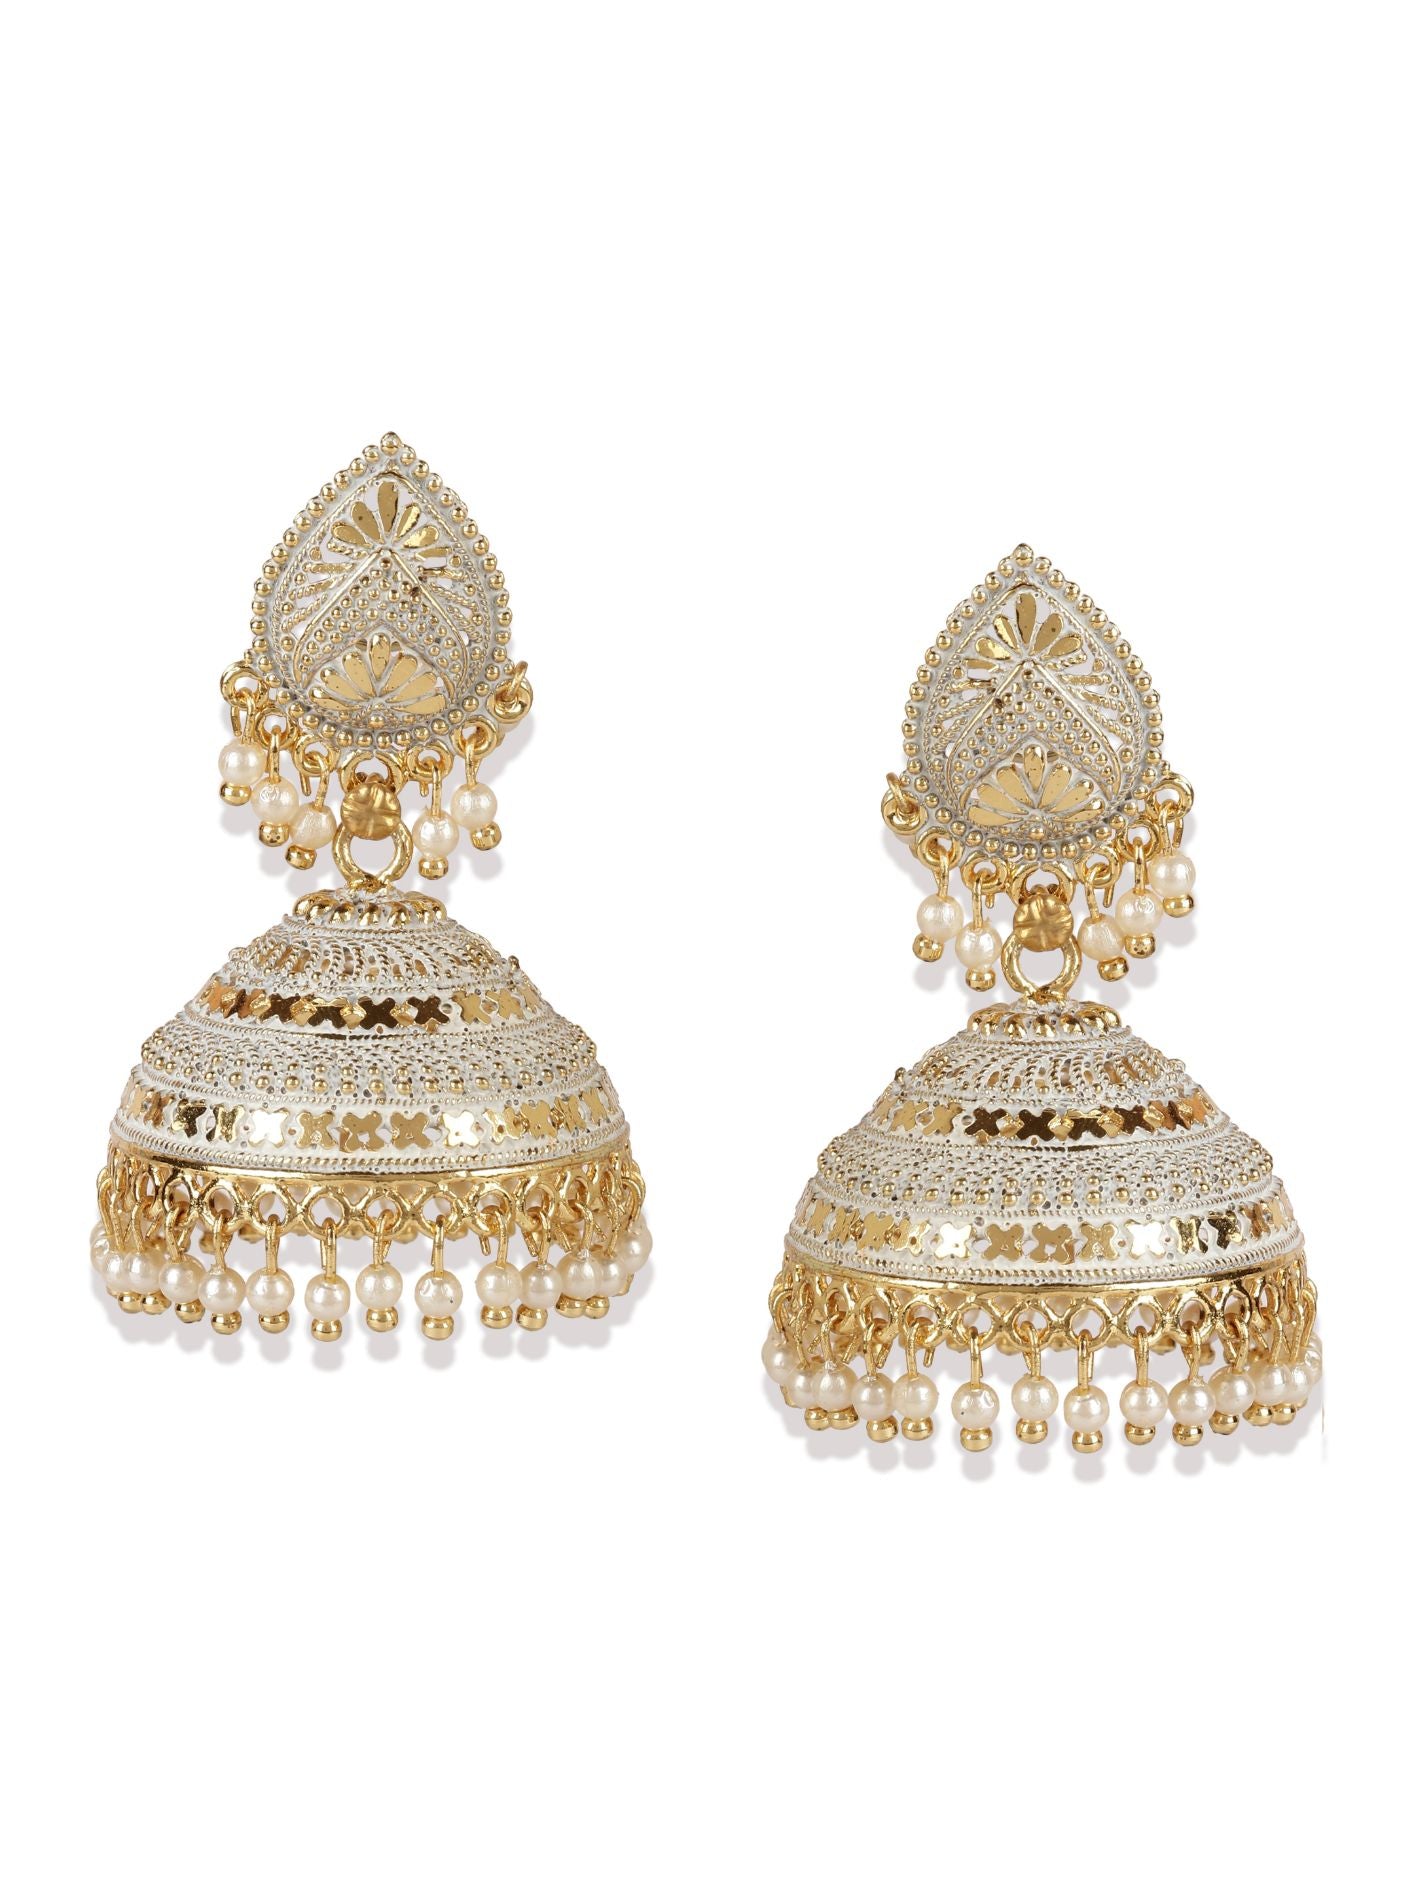 Women's Classic Designed Gold Plated Enamelled Jhumka Earrings - Anikas Creation